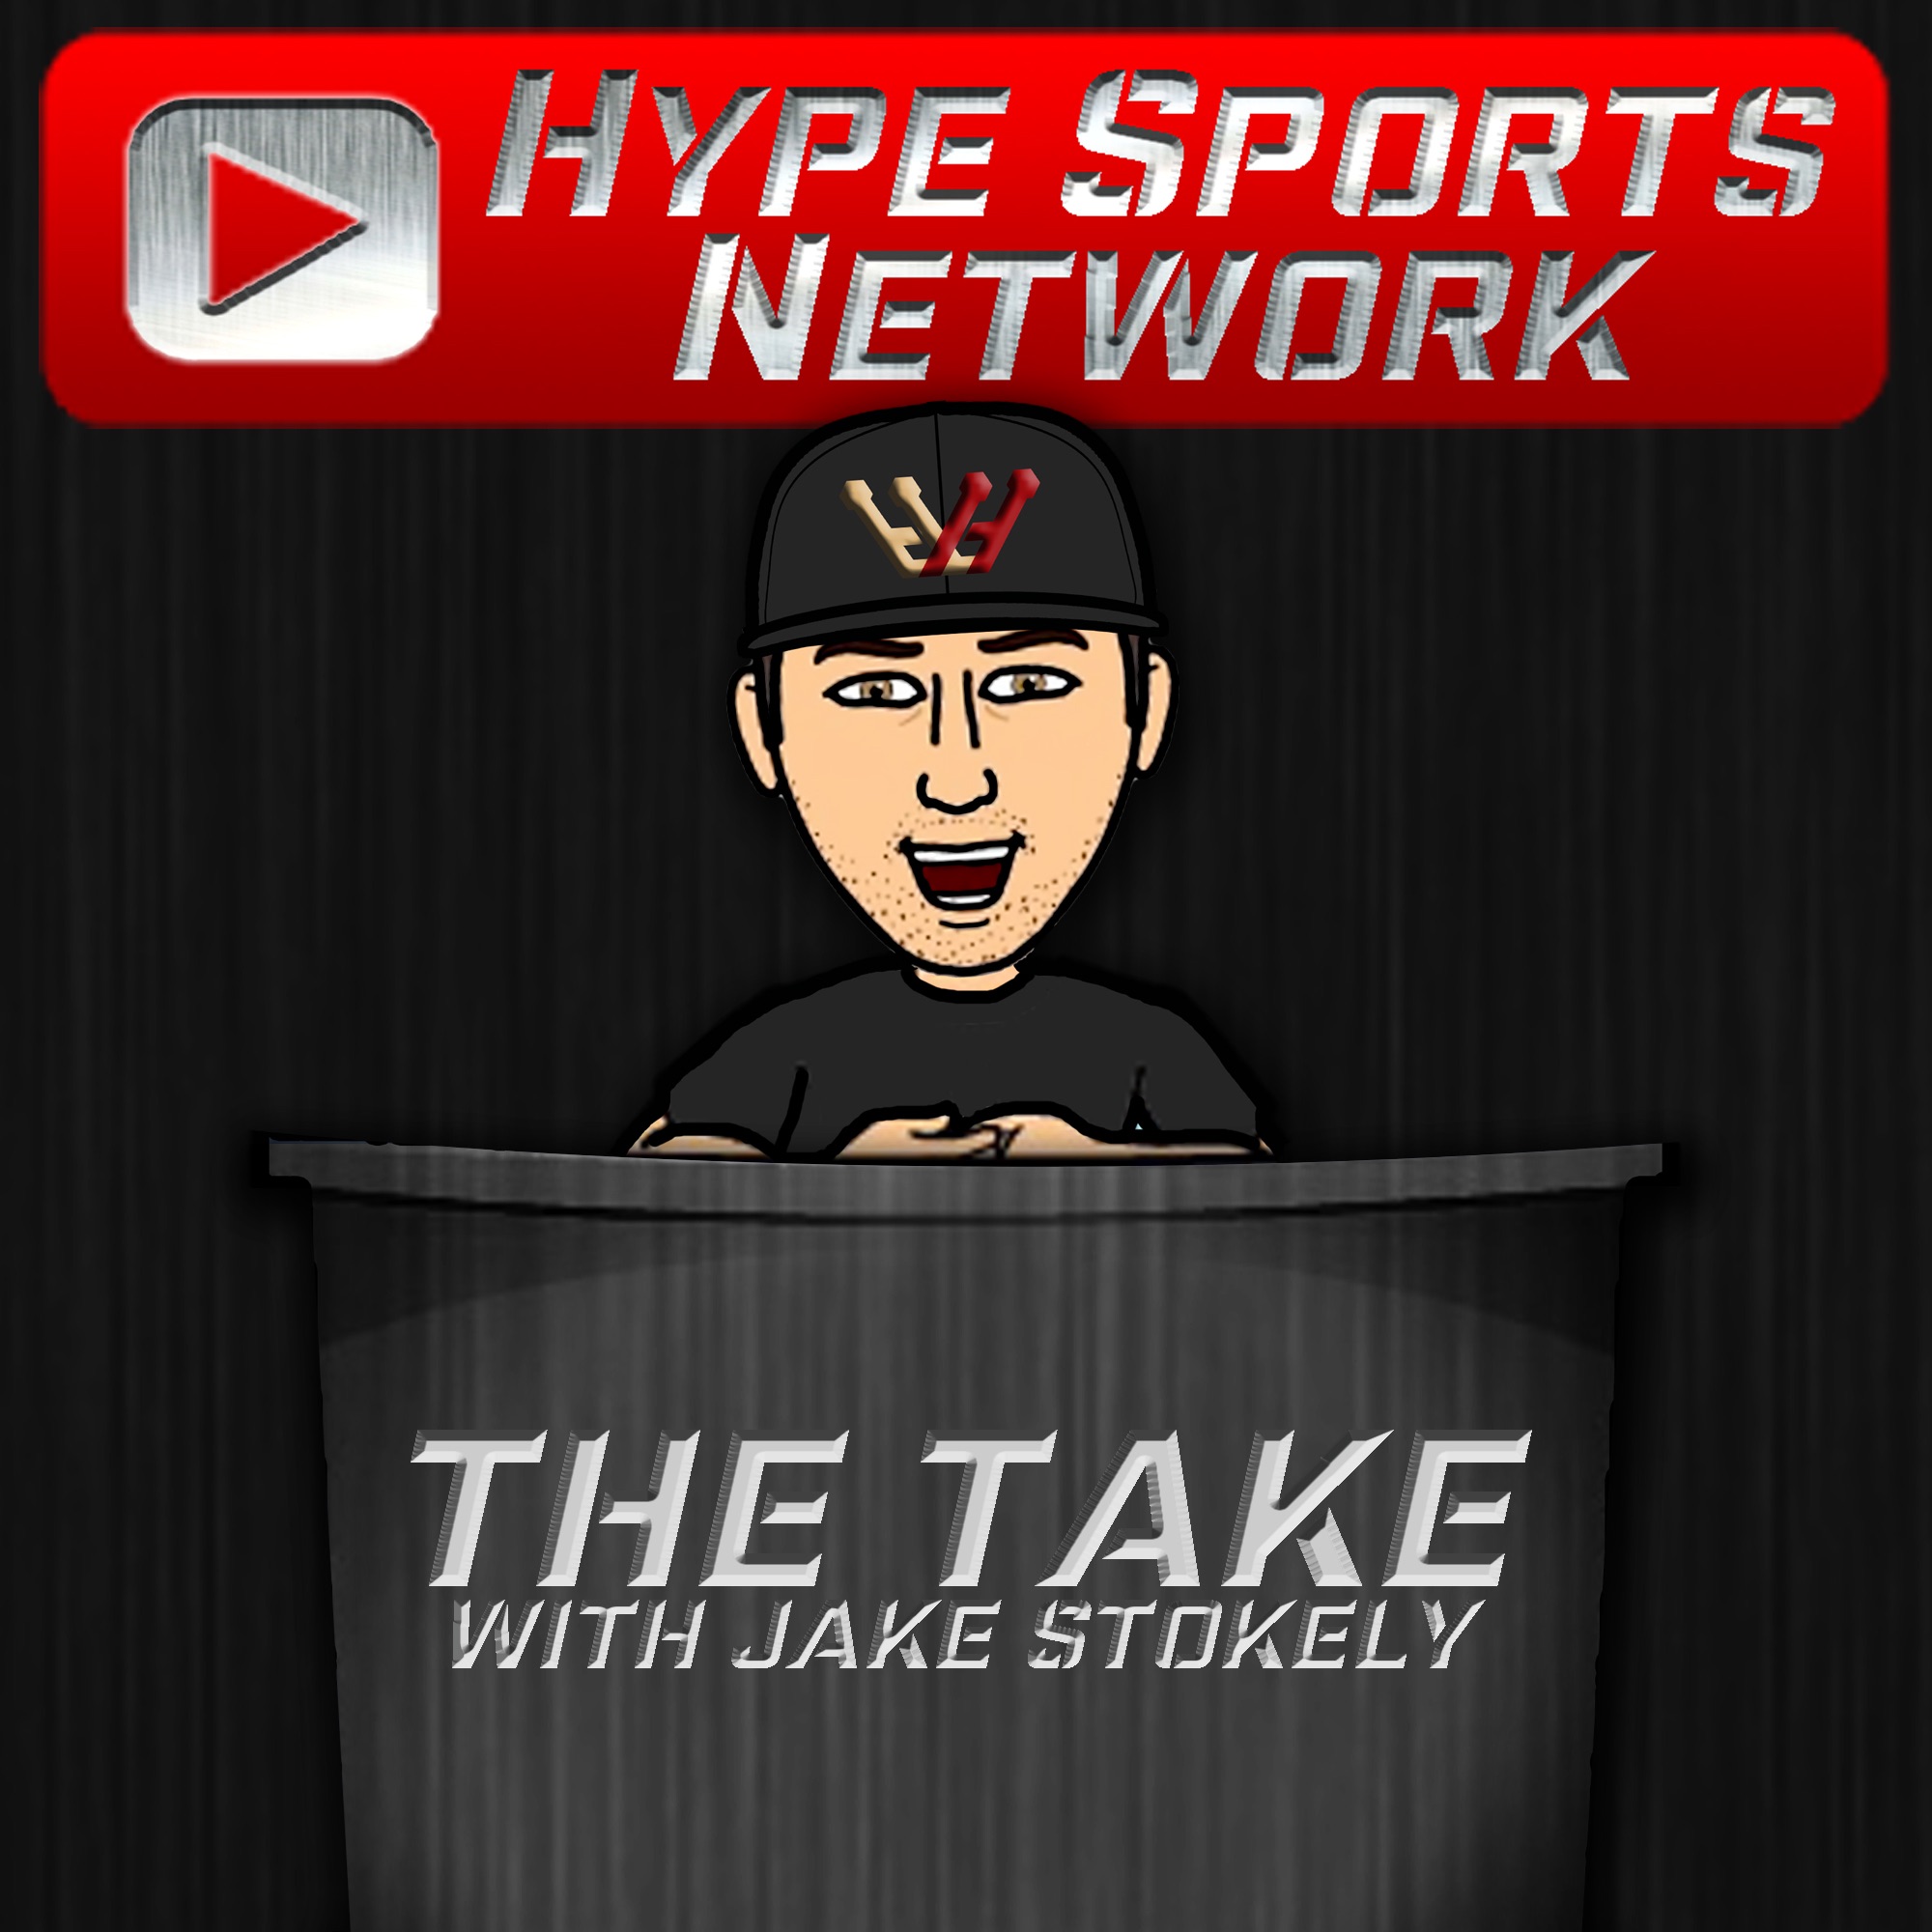 Hype Sports Network